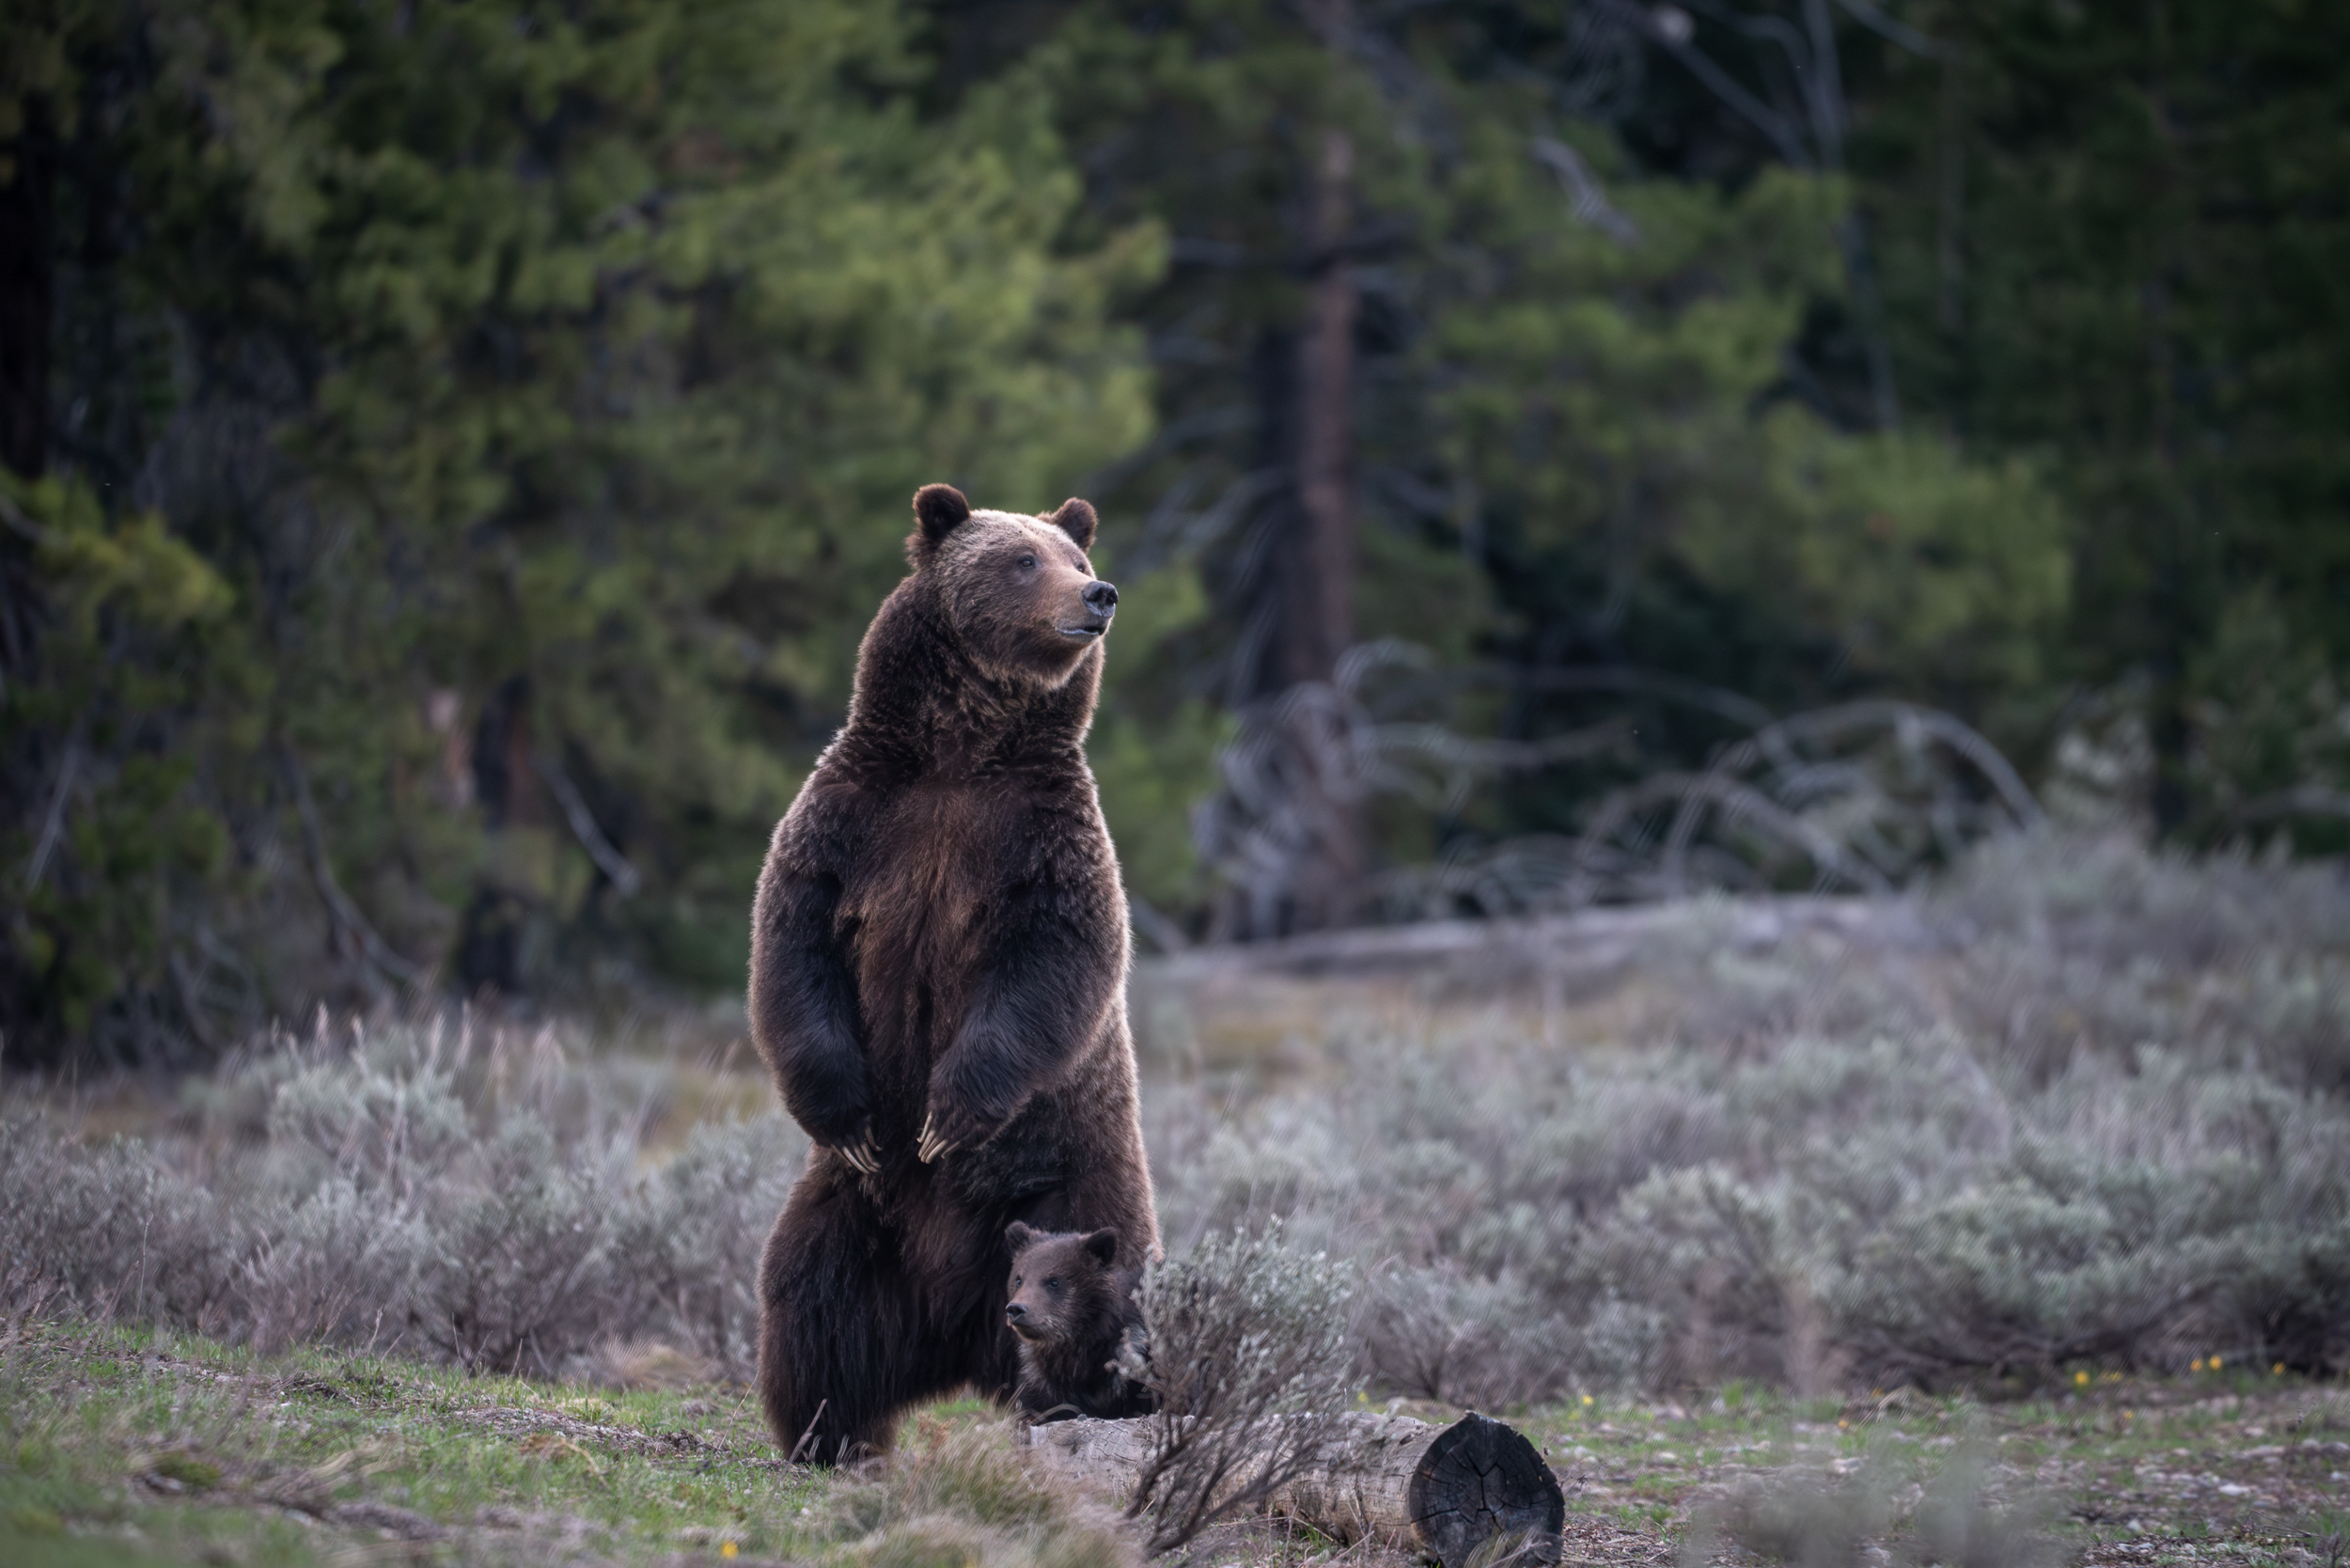 grizzly bear #399 with cub in tow in a field of sagebrush, surrounded by forest